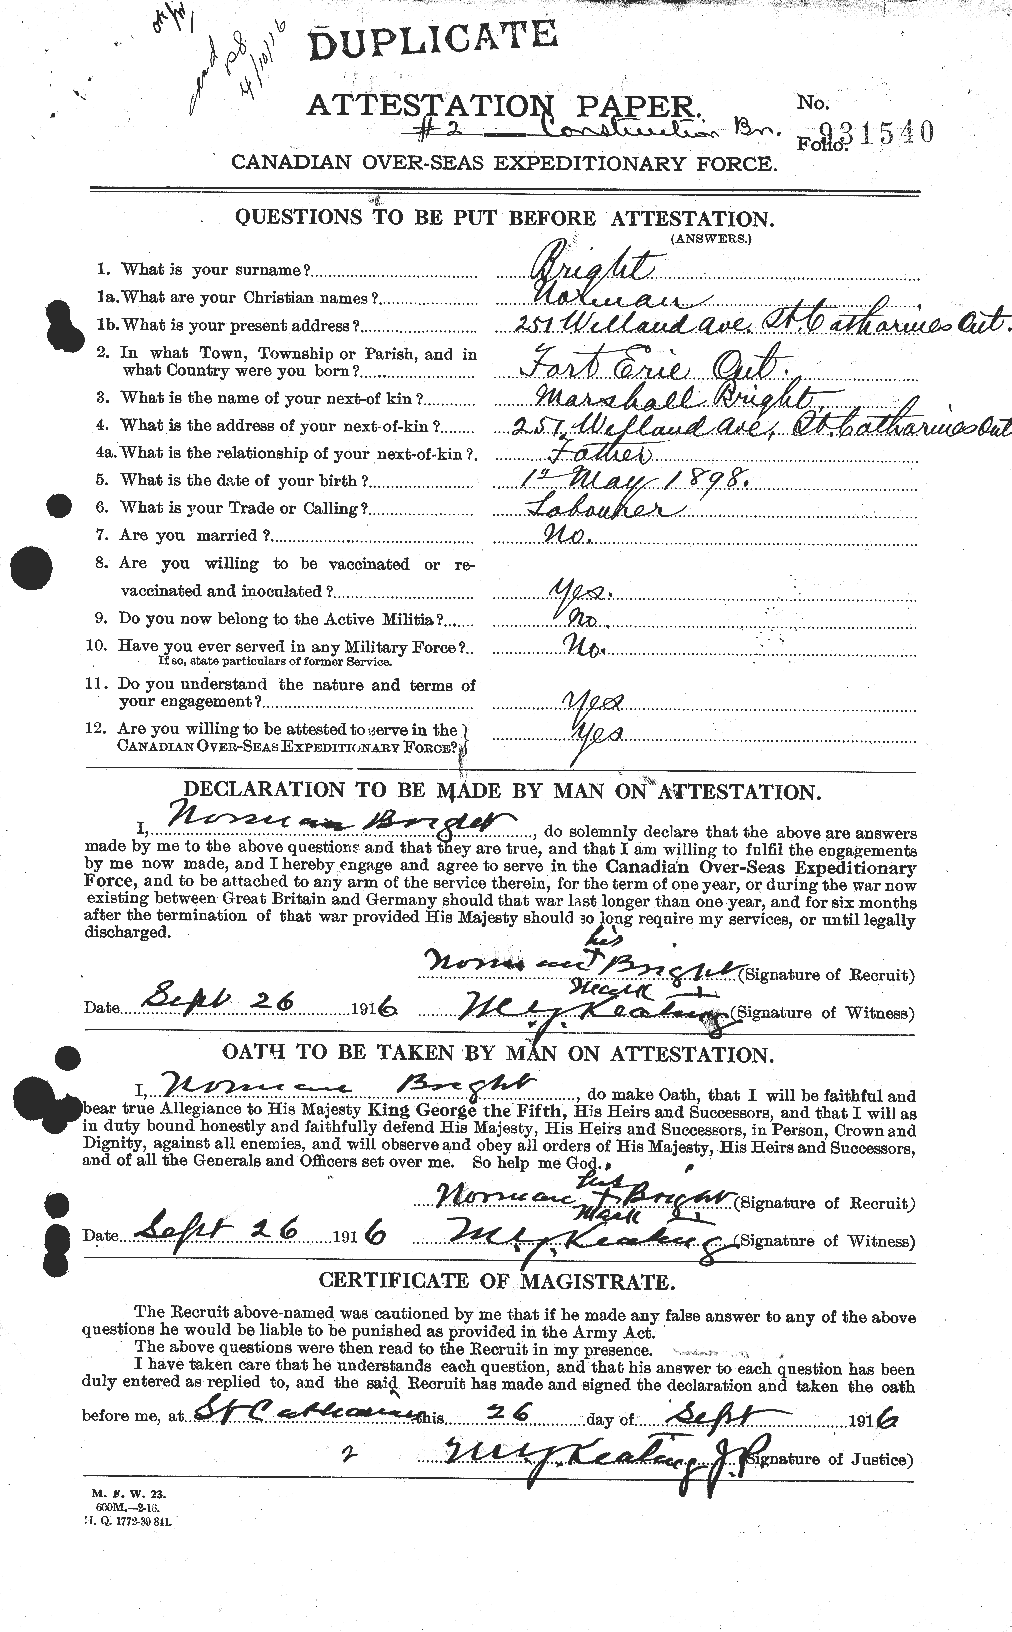 Personnel Records of the First World War - CEF 265078a